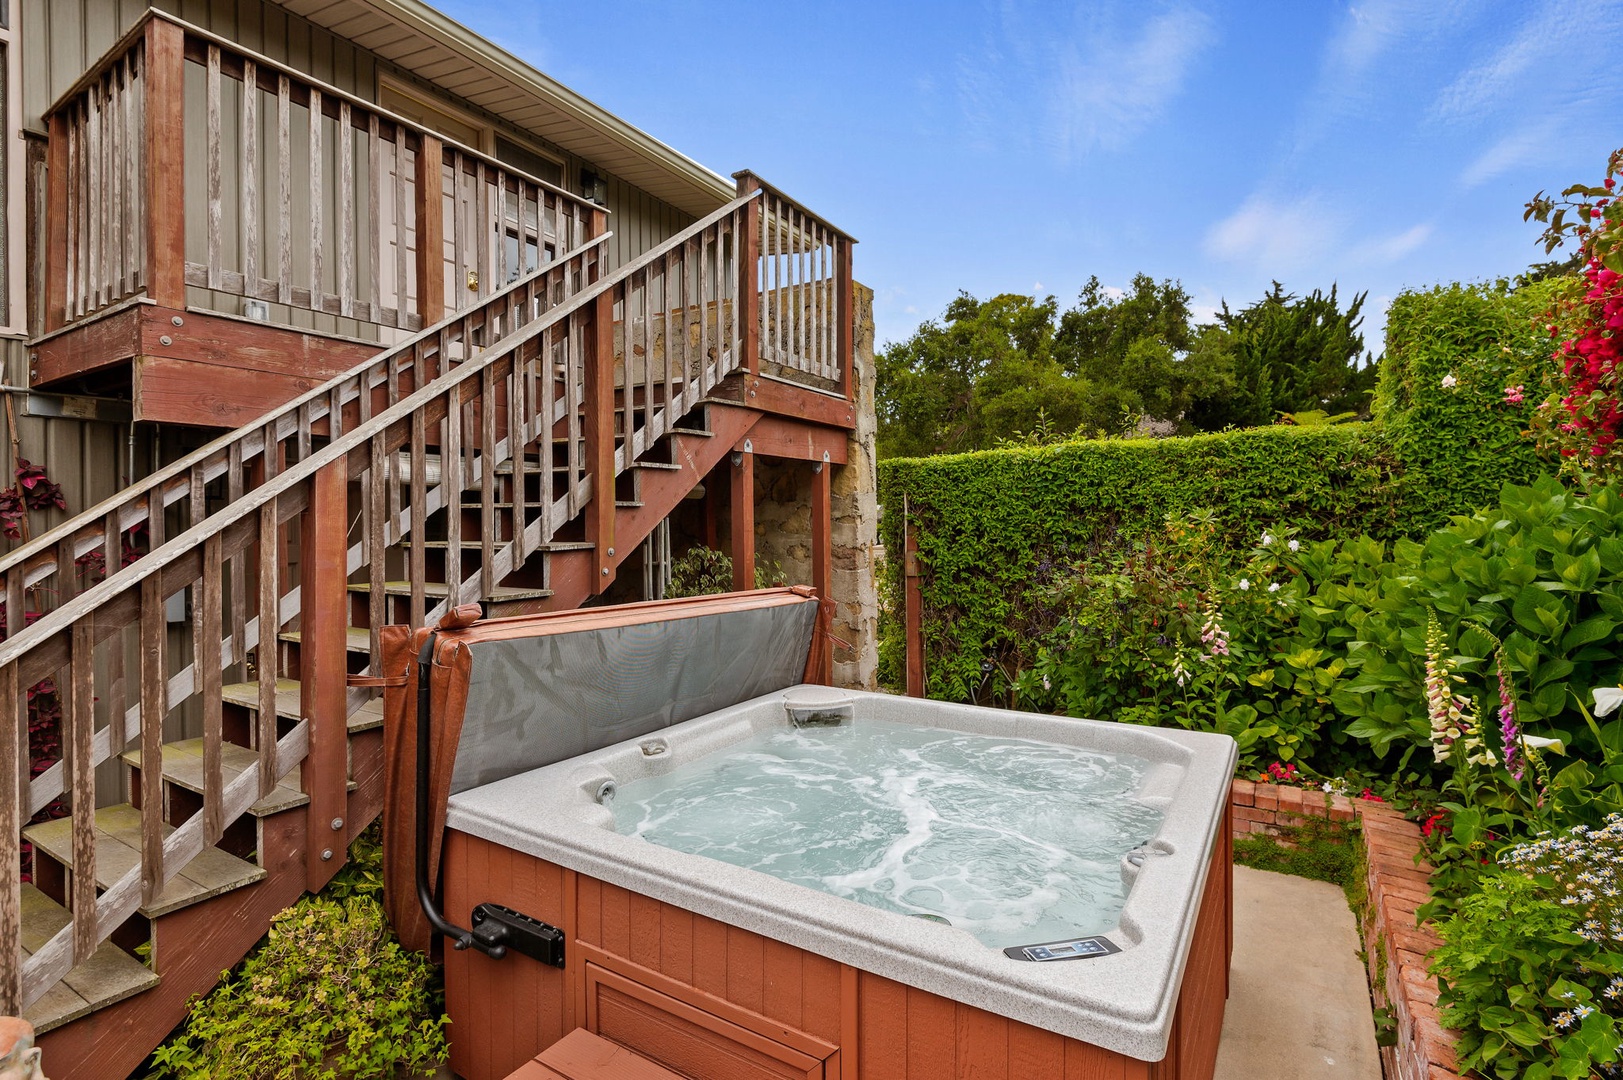 Soak all your troubles away in your own Hot Tub surrounded by glorious gardens